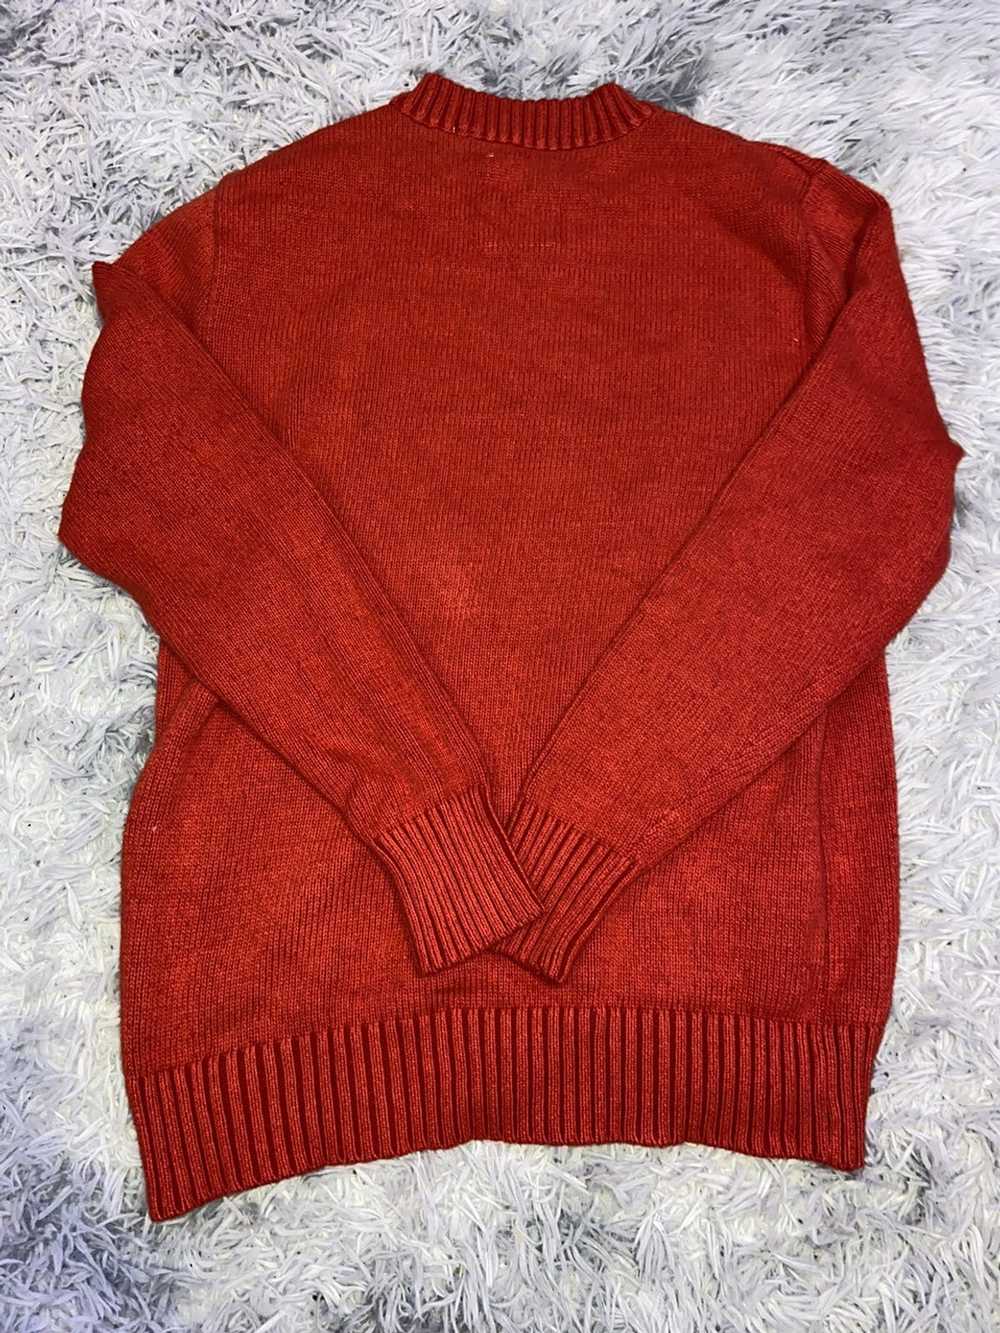 Mustang × Vintage RARE RED MUSTANG SWEATER SIZE L… - image 6